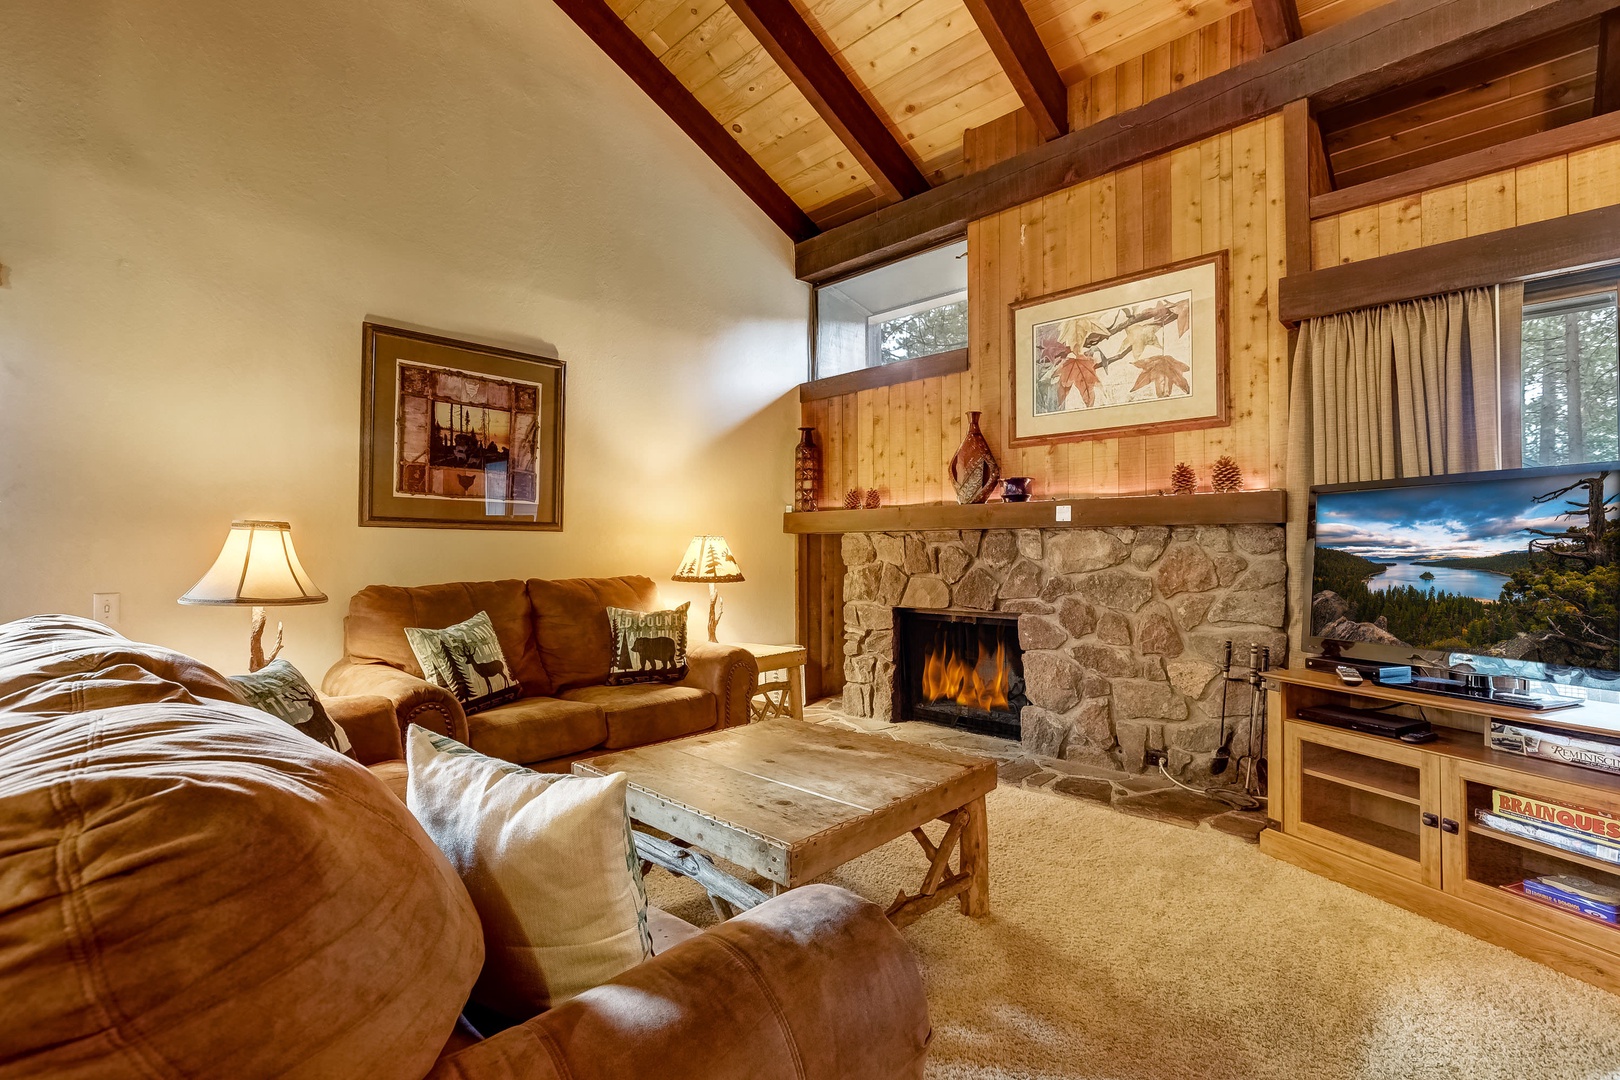 Living room w/ DVD player, flat screen TV, wood burning fireplace, board games